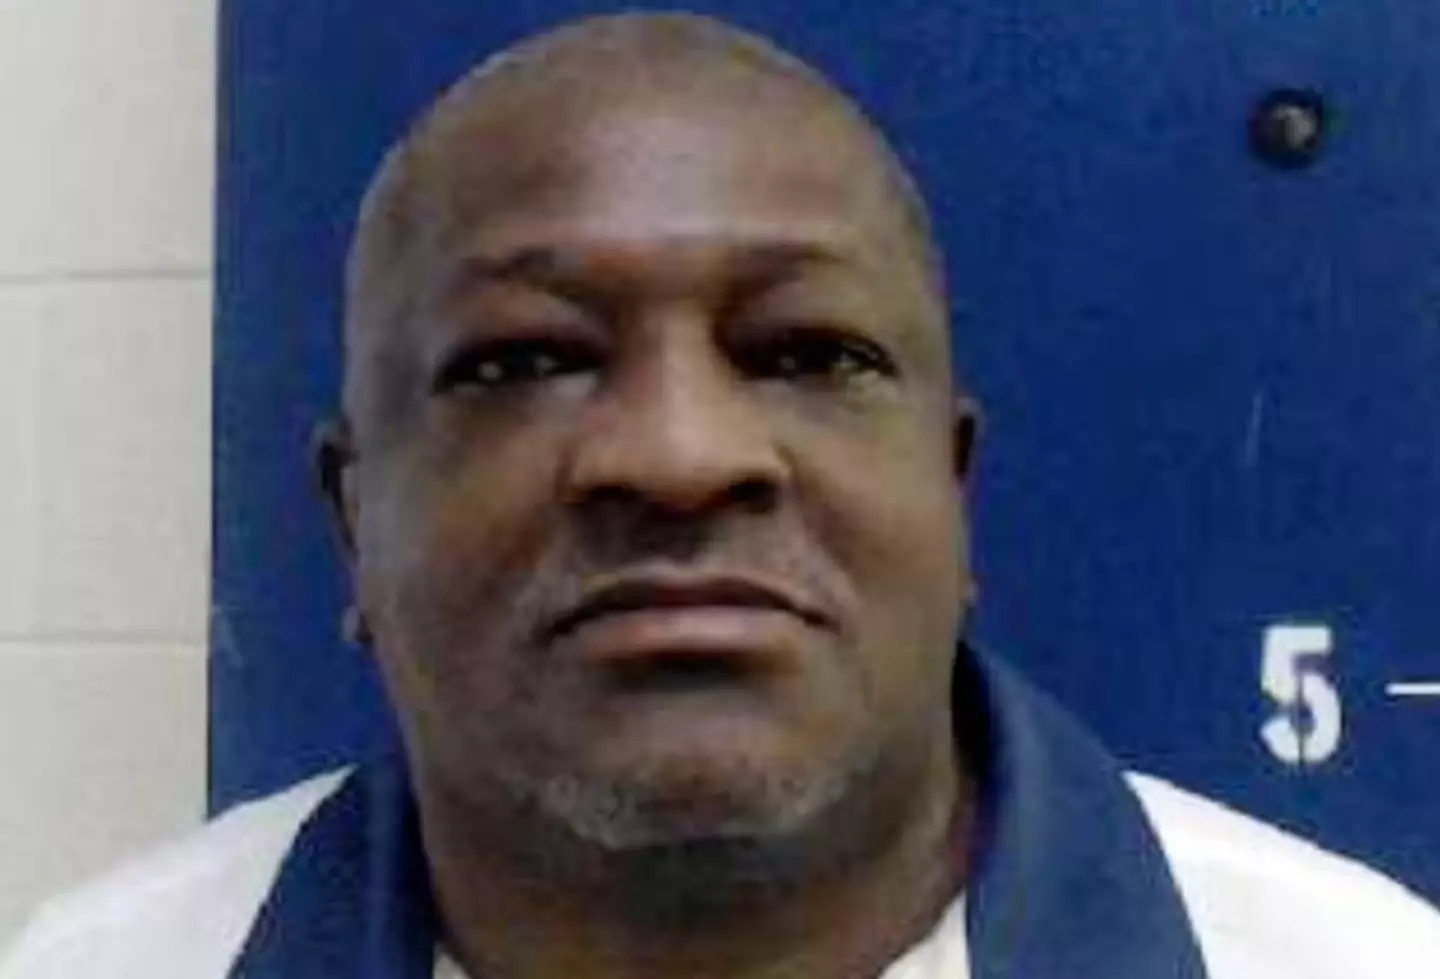 Willie James Pye's appeal was denied.